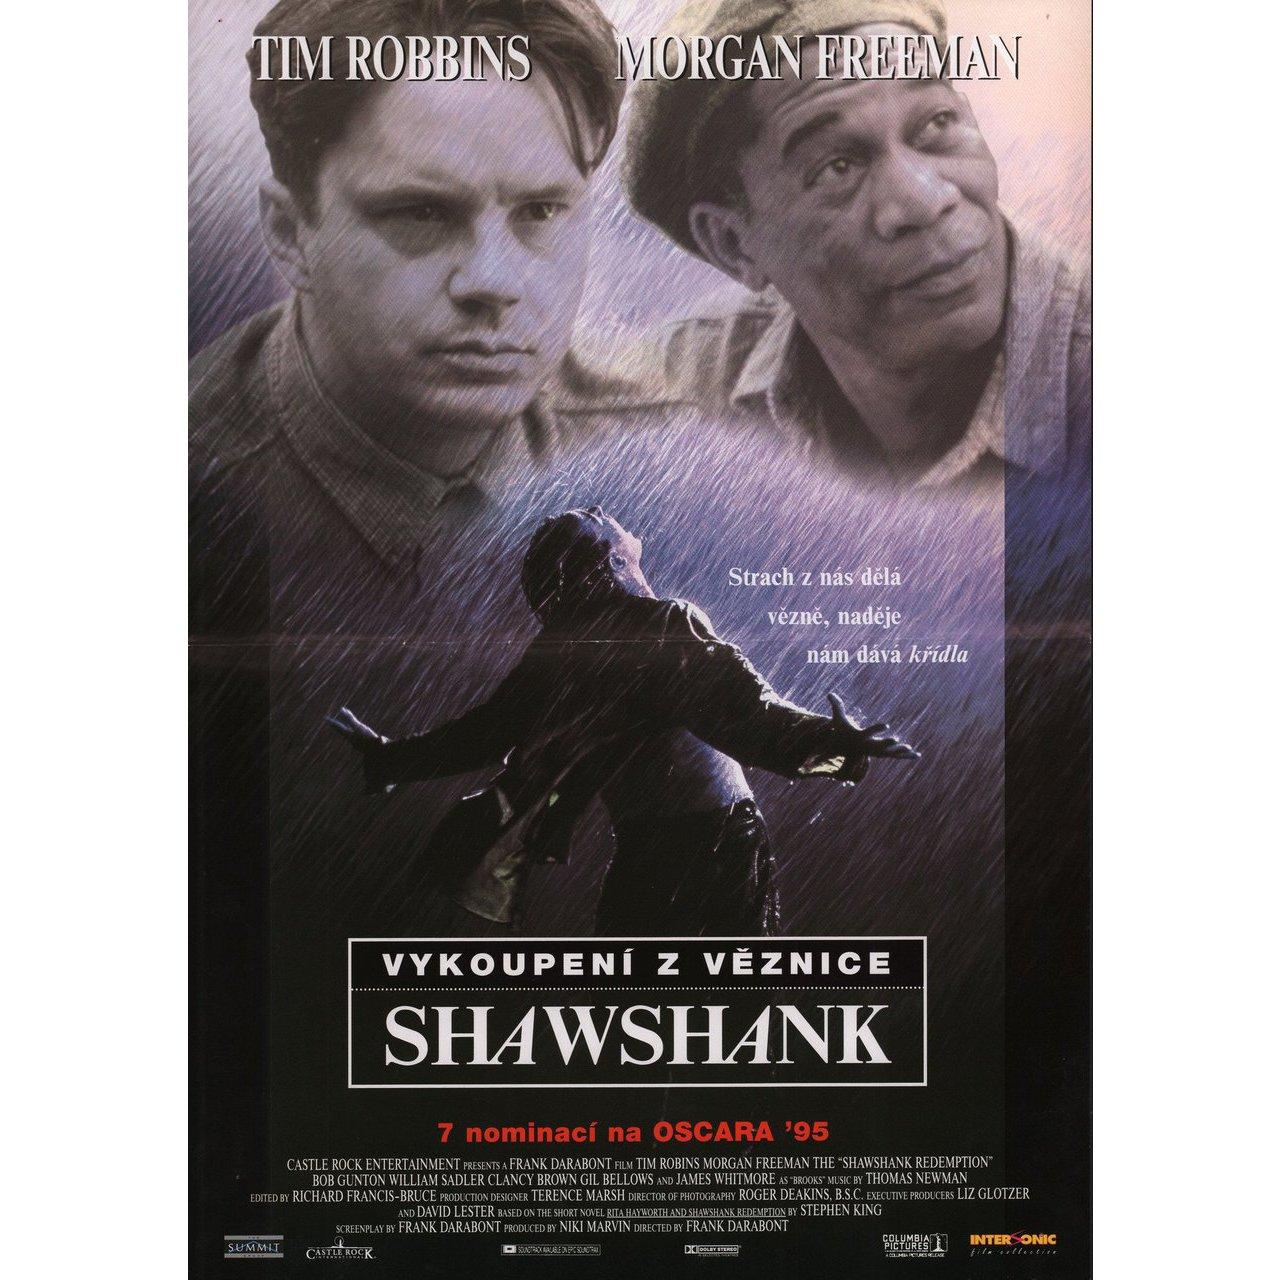 Original 1994 Czech A3 poster for the film “The Shawshank Redemption” directed by Frank Darabont with Tim Robbins / Morgan Freeman / Bob Gunton / William Sadler. Fine condition, folded. Many original posters were issued folded or were subsequently